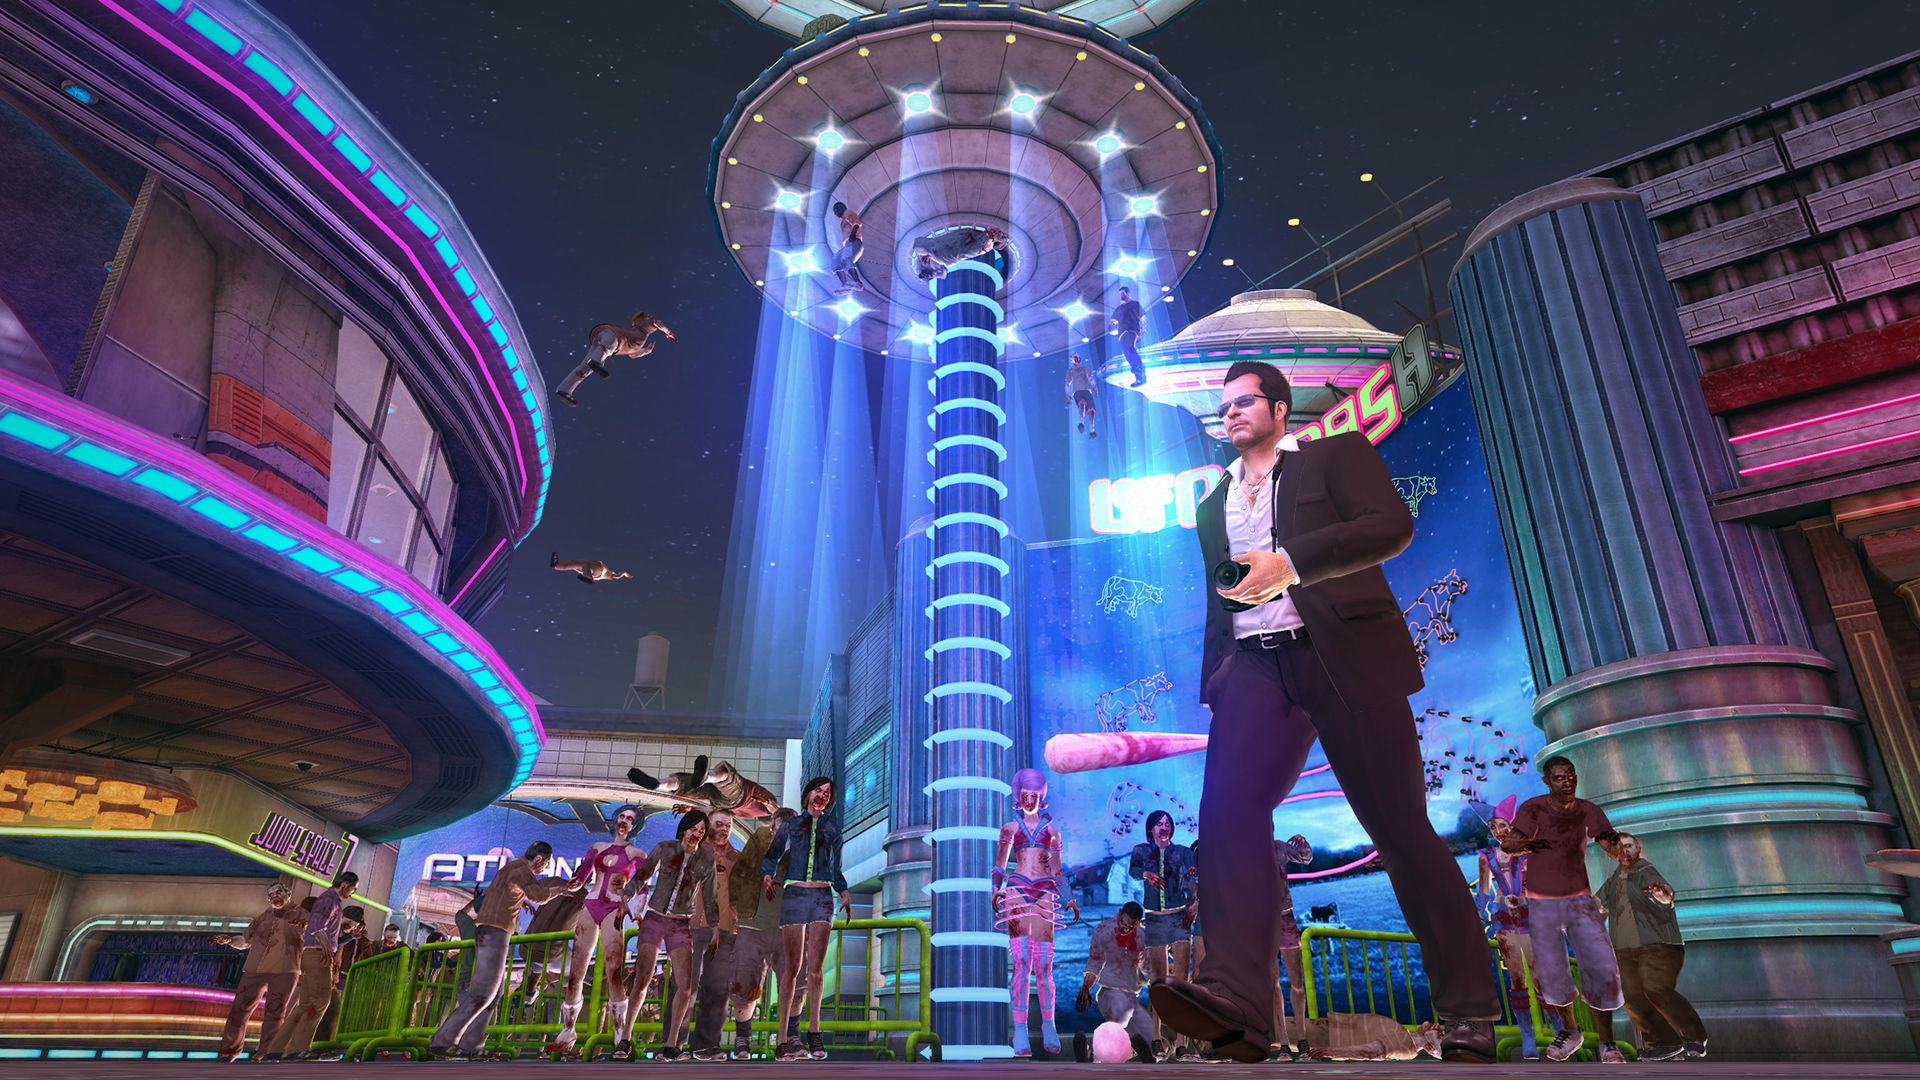 Dead Rising 2: Off the Record (Video Game 2011) - IMDb